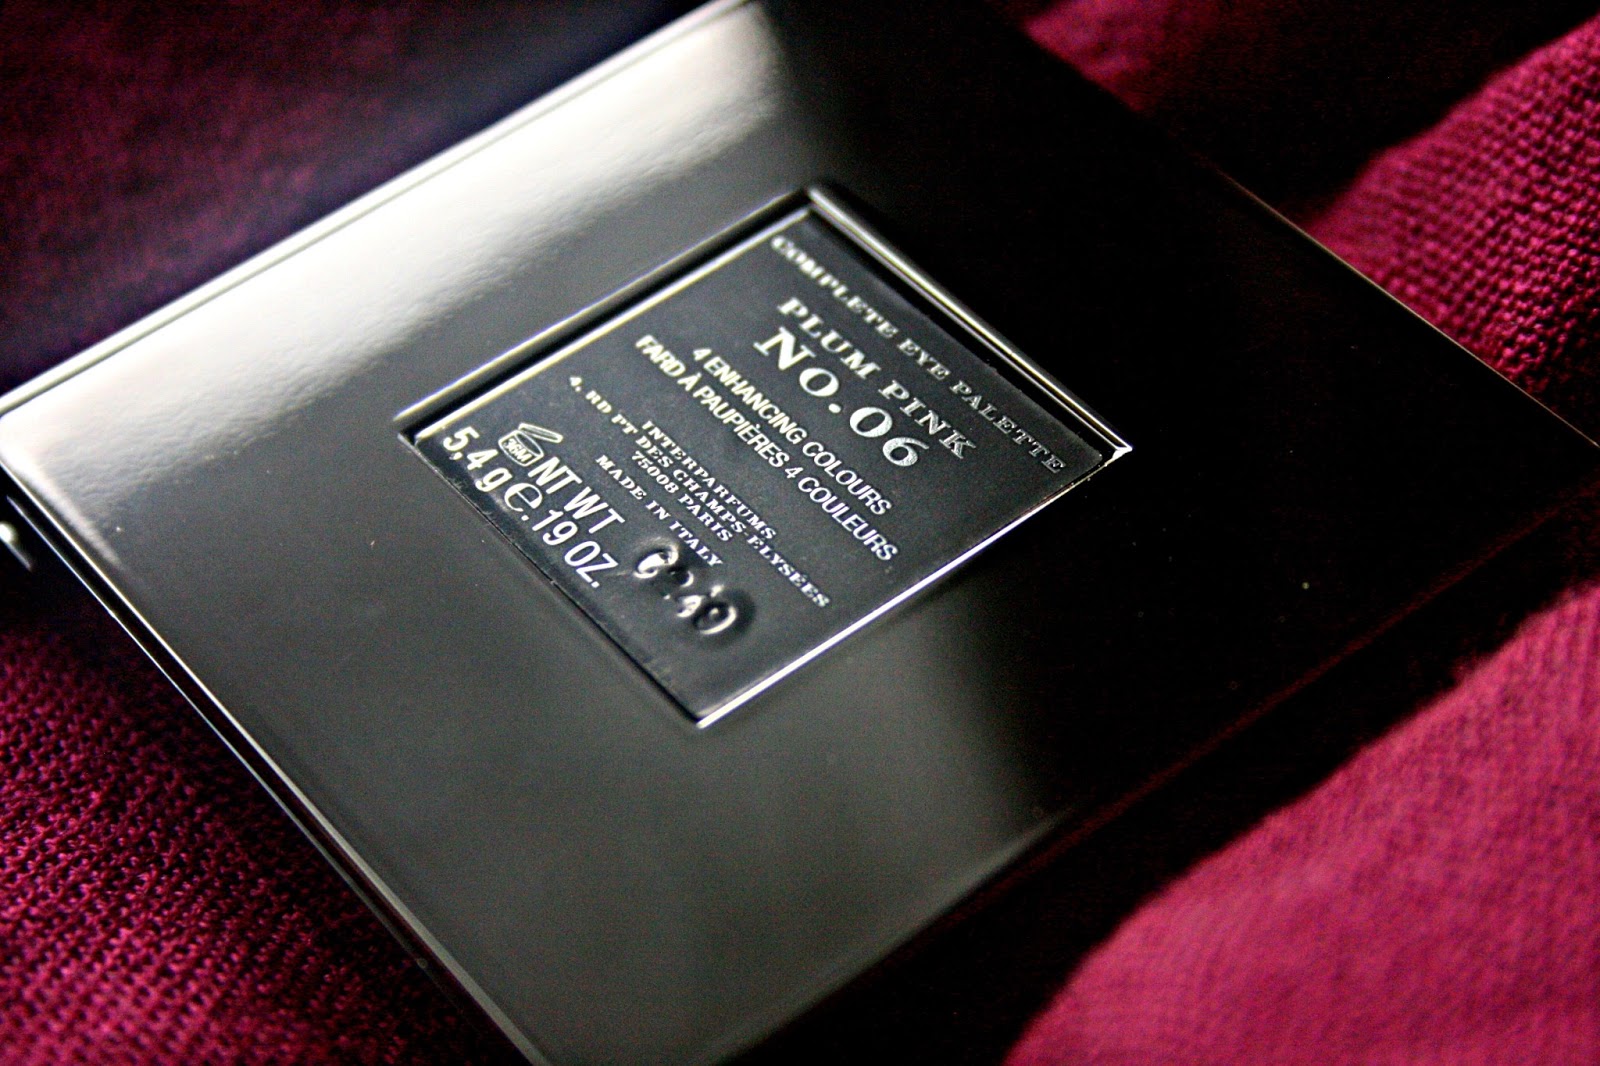 Makeup, Beauty and More: Burberry Complete Eye Palette in Plum Pink